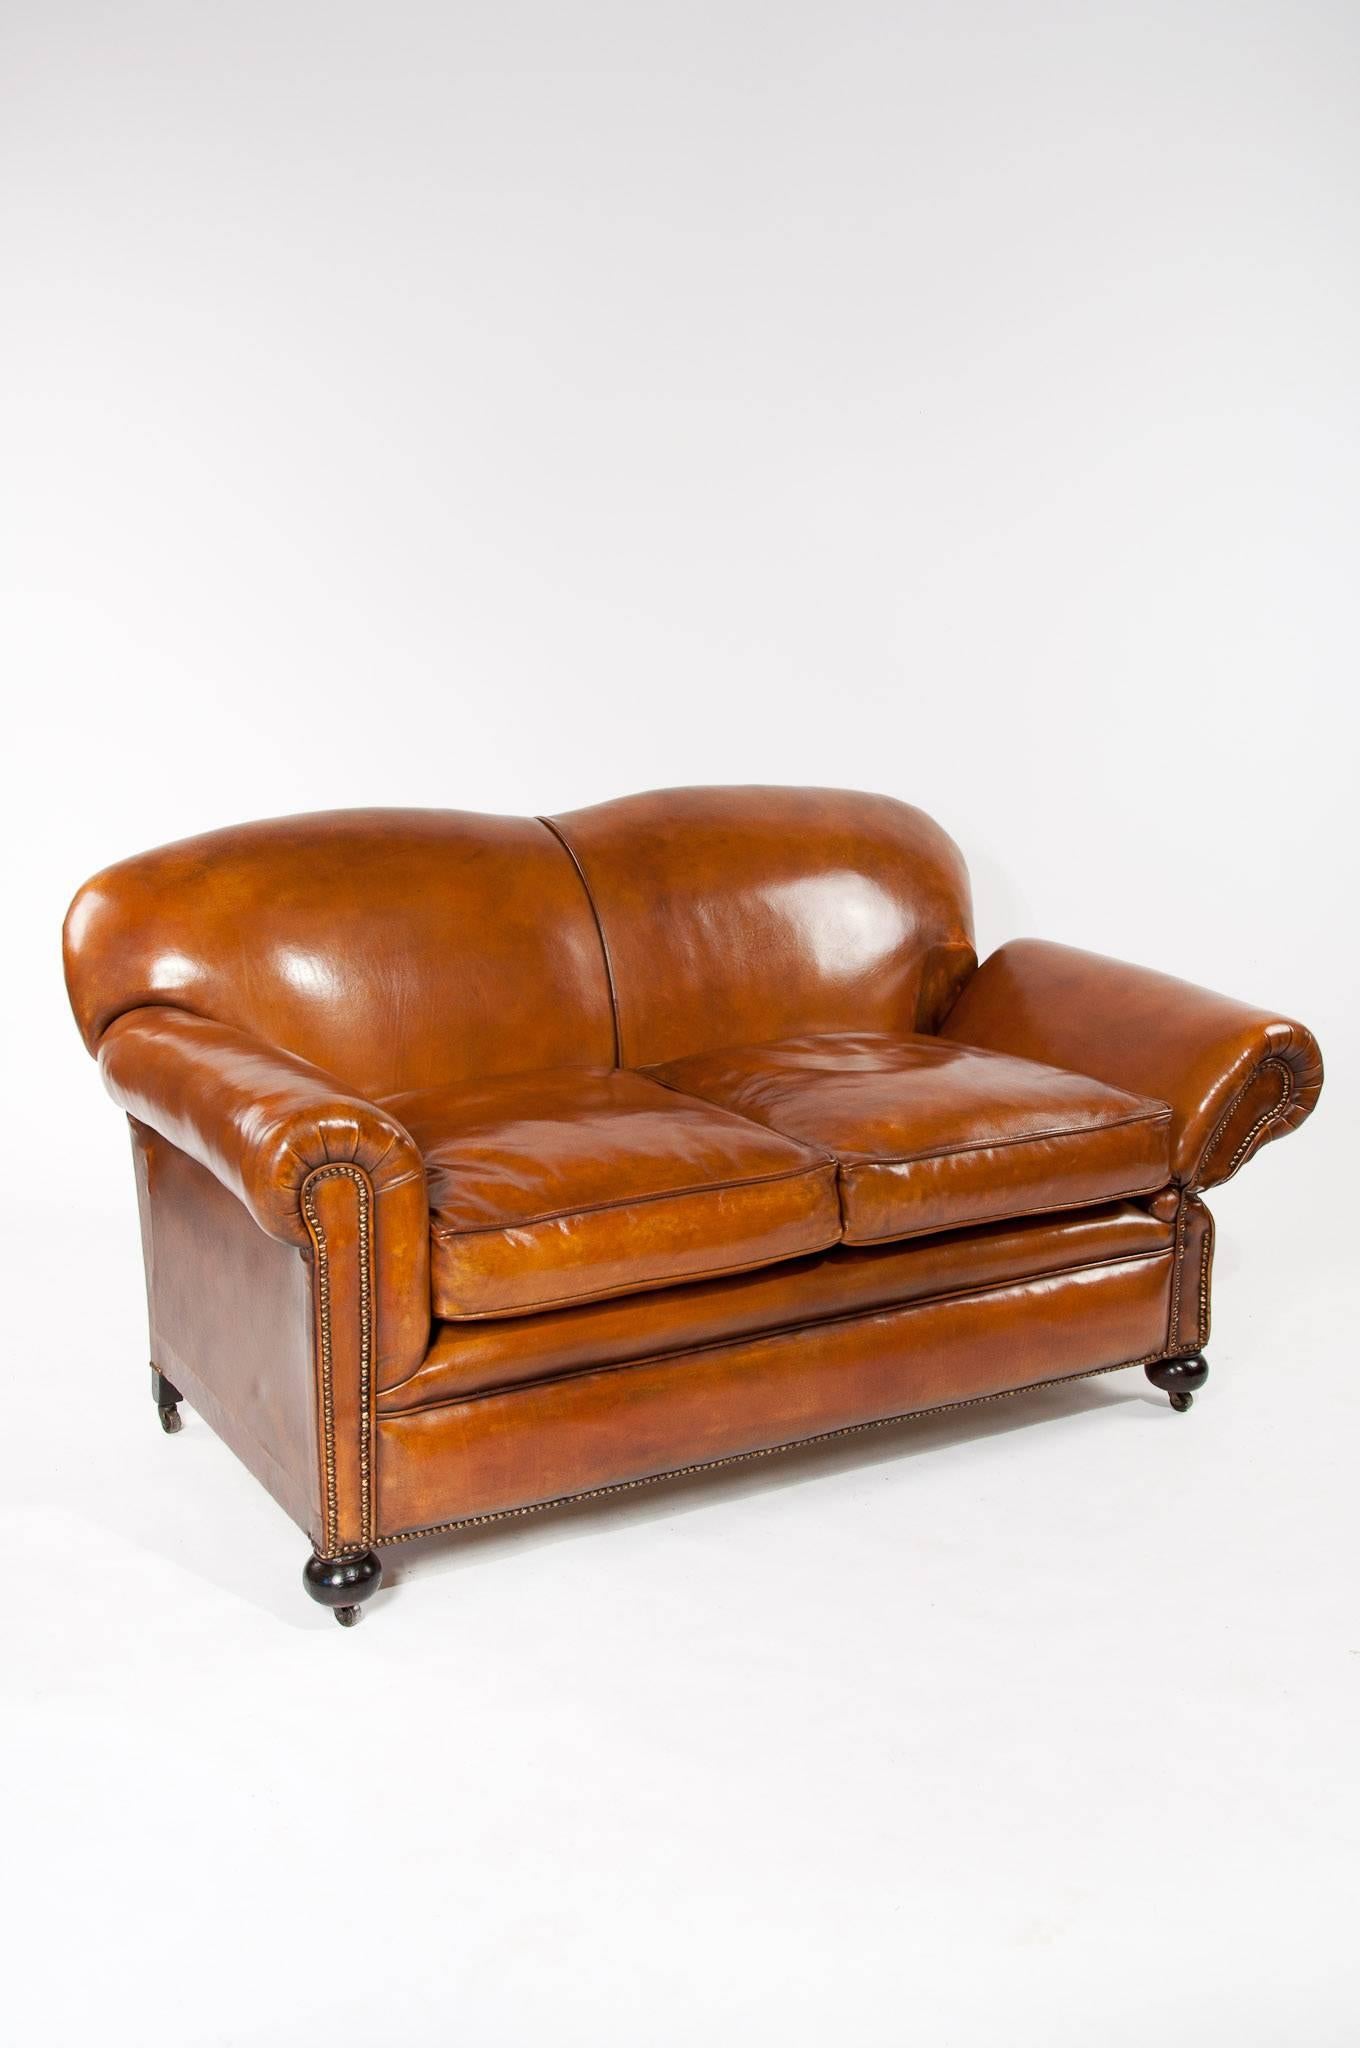 A very good quality Edwardian drop arm leather sofa / couch / settee upholstered in a tan leather.
This well proportioned Edwardian sofa dating to circa 1910 has a shaped back with scrolled arms and a deep feather filled cushion making this sofa